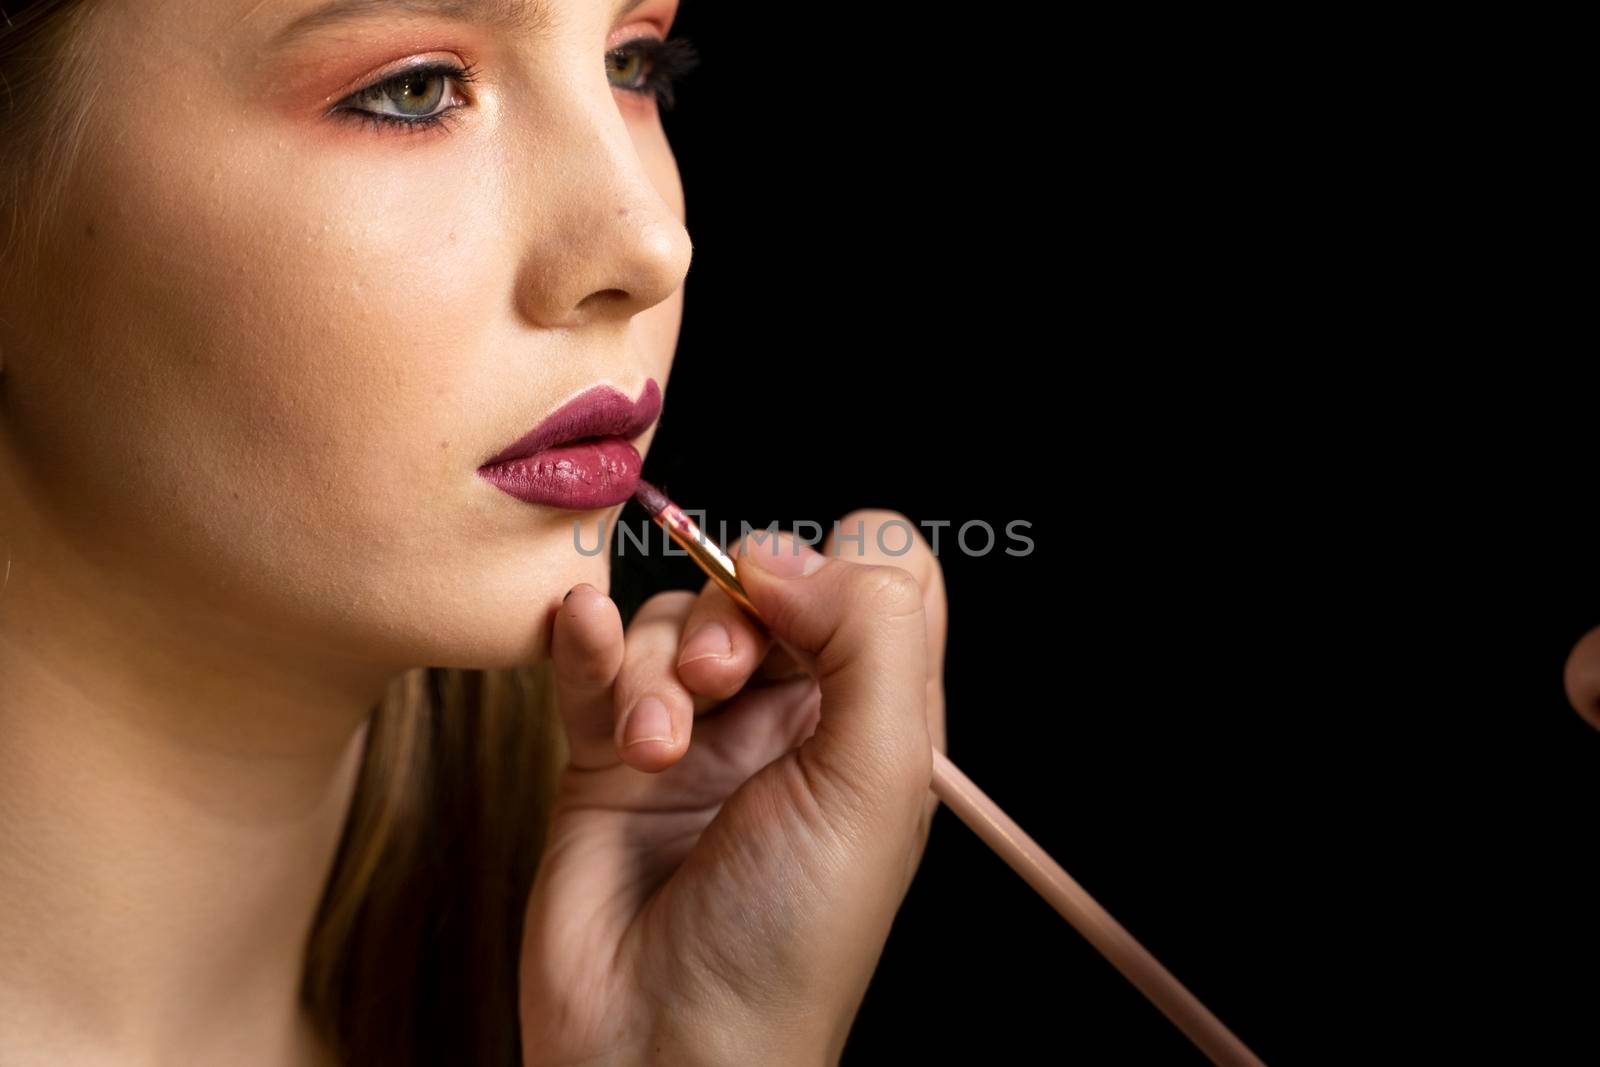 Makeup artist applies red lipstick on a beautiful woman face. Hand of make-up master, painting lips of young beauty model girl. Make up in process